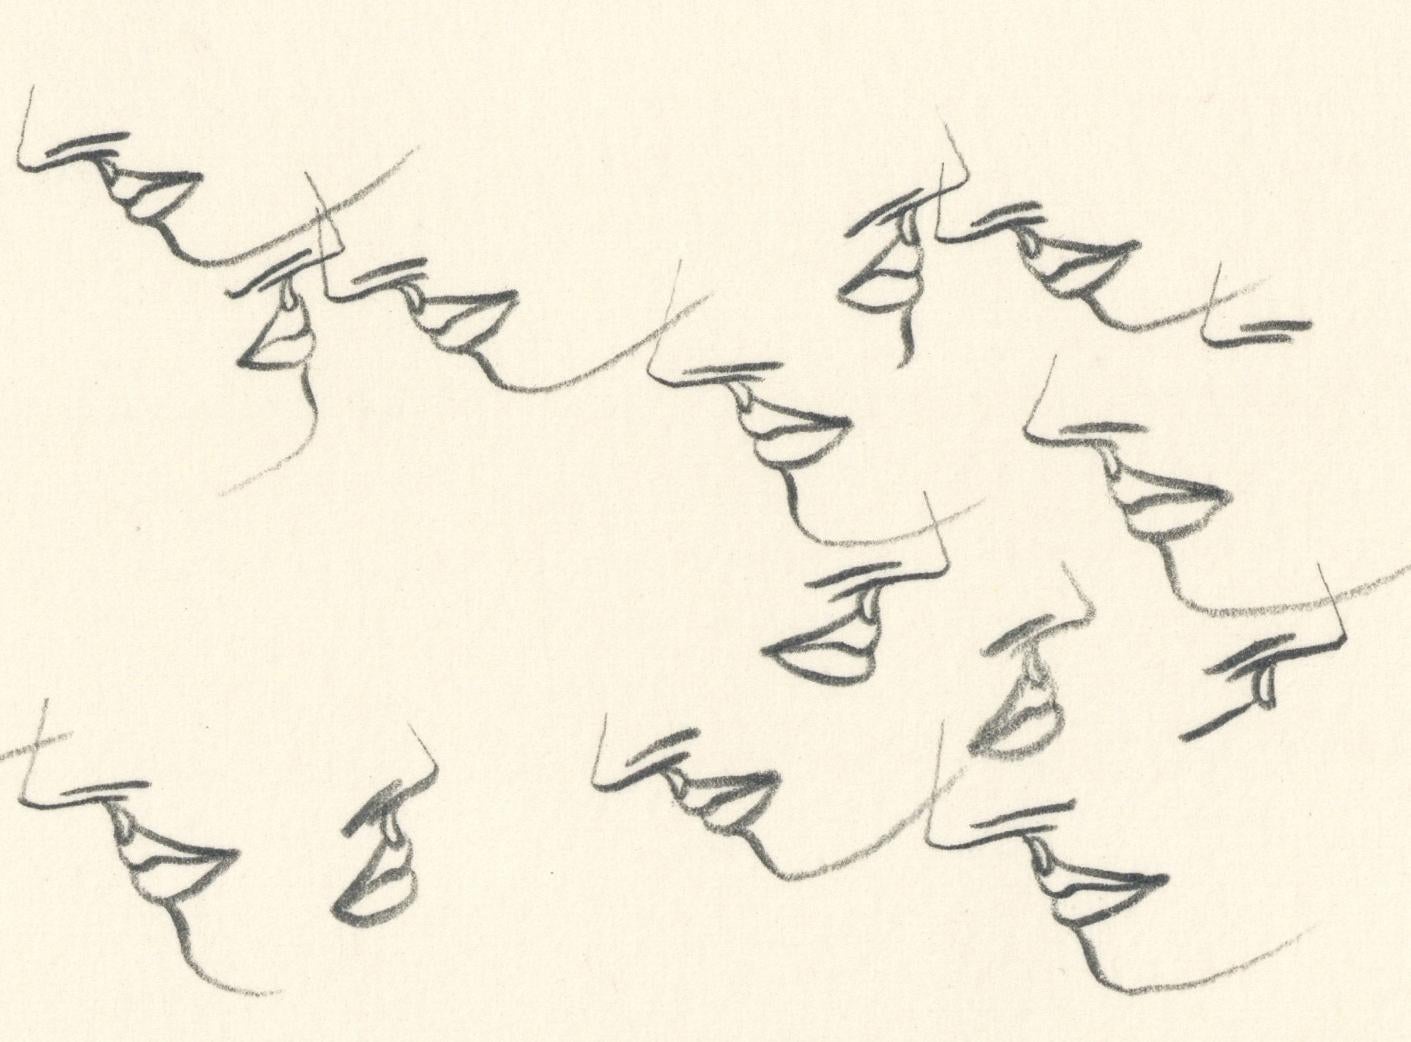 Linda Stein,  Profile Flying 446.156 - Signed Feminist LGBTQ+ Graphite on Paper Drawing 

Profile Flying 446.156 is from Linda Stein's Profiles series--drawings, collages and paintings of facial profiles she made in the 1960s and 1970s when she was